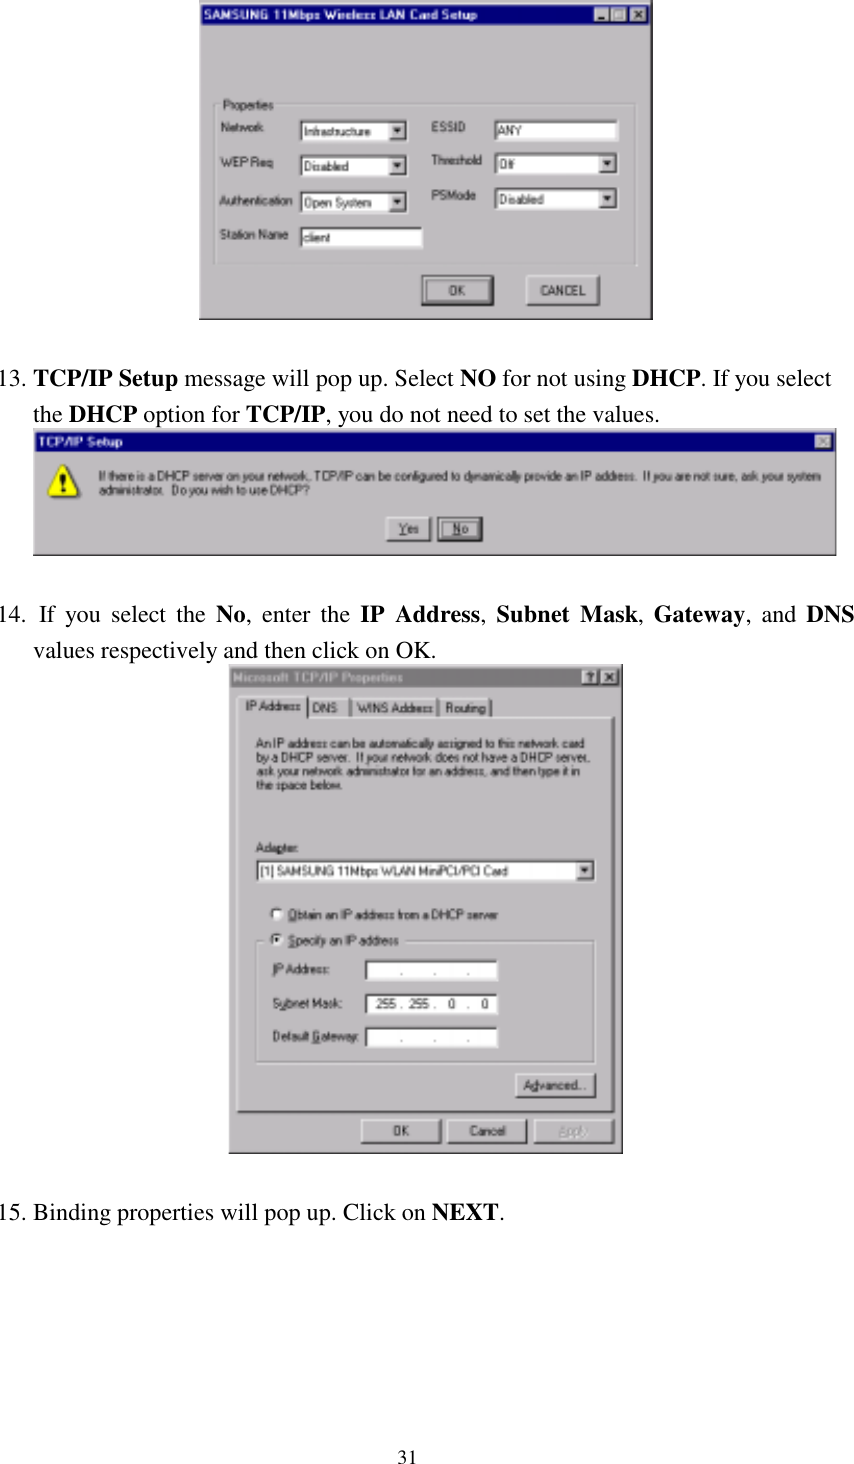  31   13. TCP/IP Setup message will pop up. Select NO for not using DHCP. If you select the DHCP option for TCP/IP, you do not need to set the values.   14.  If you select the No, enter the IP Address,  Subnet Mask,  Gateway, and DNS values respectively and then click on OK.   15. Binding properties will pop up. Click on NEXT. 